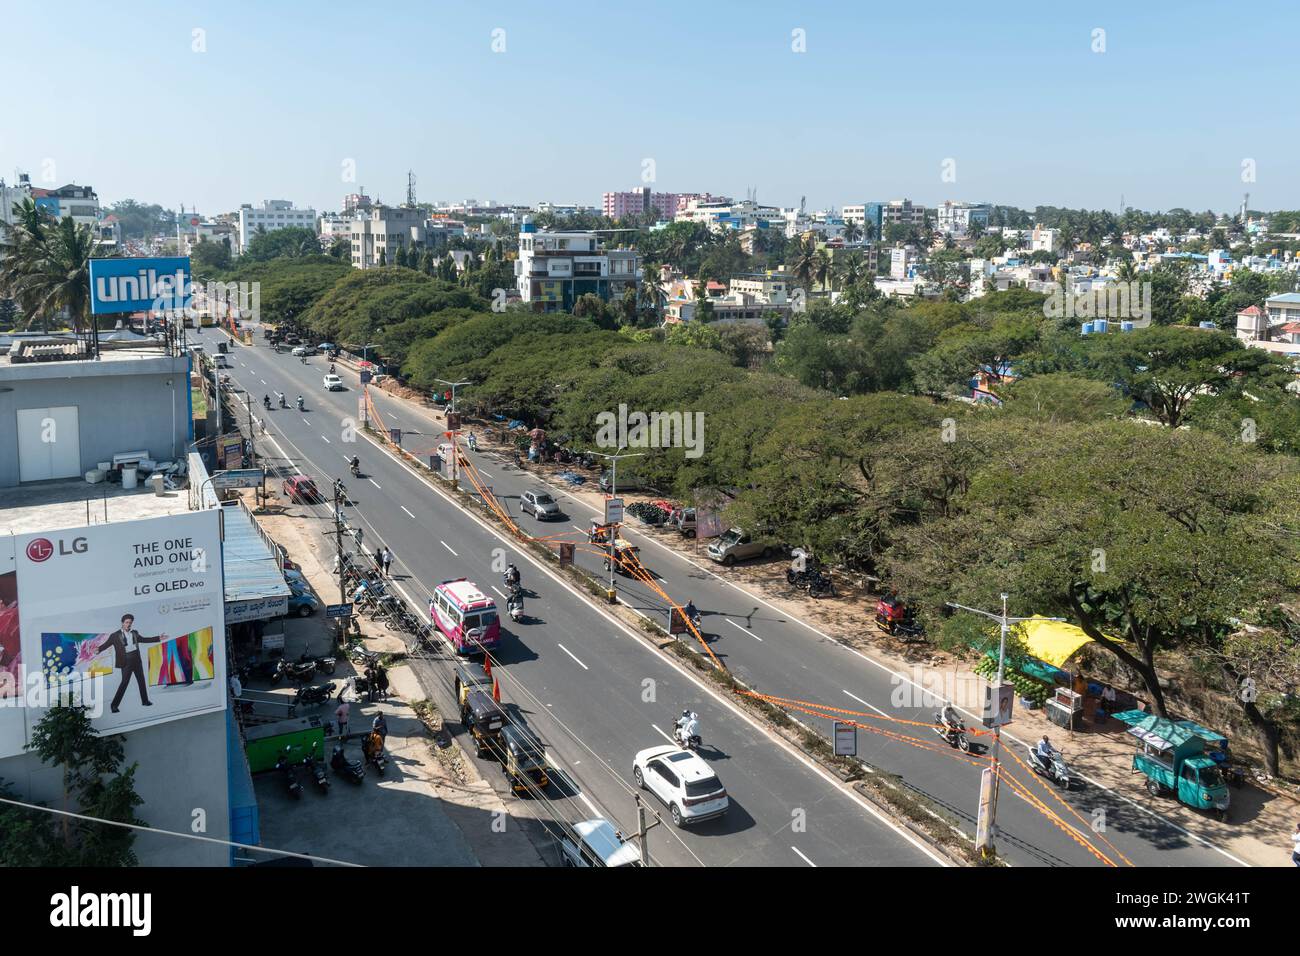 Hassan, Karnataka, India - January 10 2023: Clear sky over a bustling street, lined with shops and vehicles, showcasing urban life in a growing city d Stock Photo